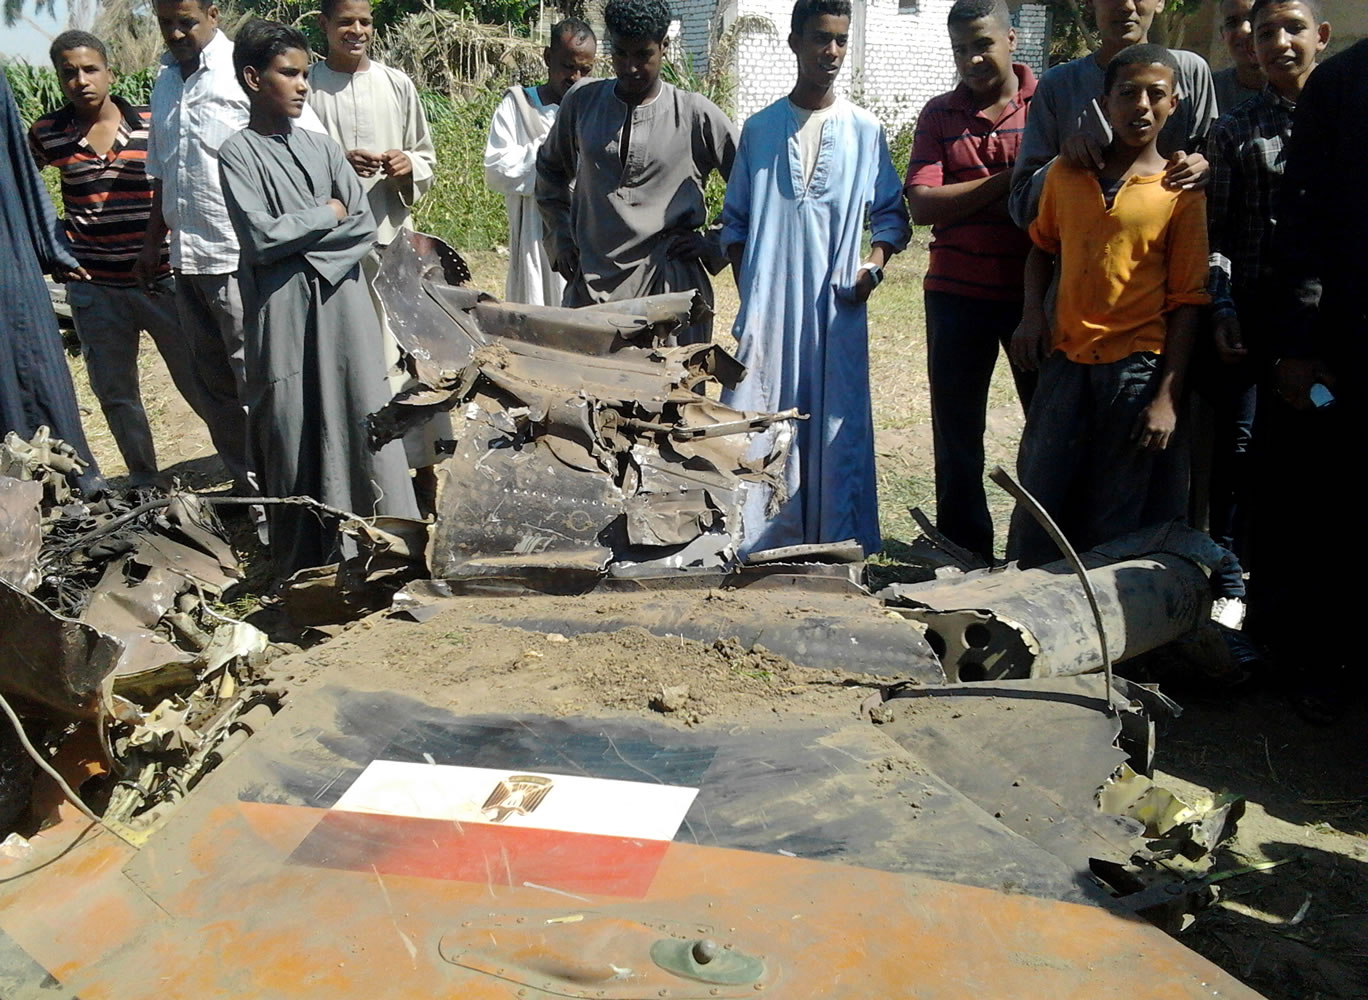 Egyptians gather around the remains of a Soviet-made MiG-21 fighter jet belonging to the Egyptian air force that crashed Sunday while on a training mission near the southern ancient city of Luxor. Officials said the crash killed a villager on the ground and injured several.